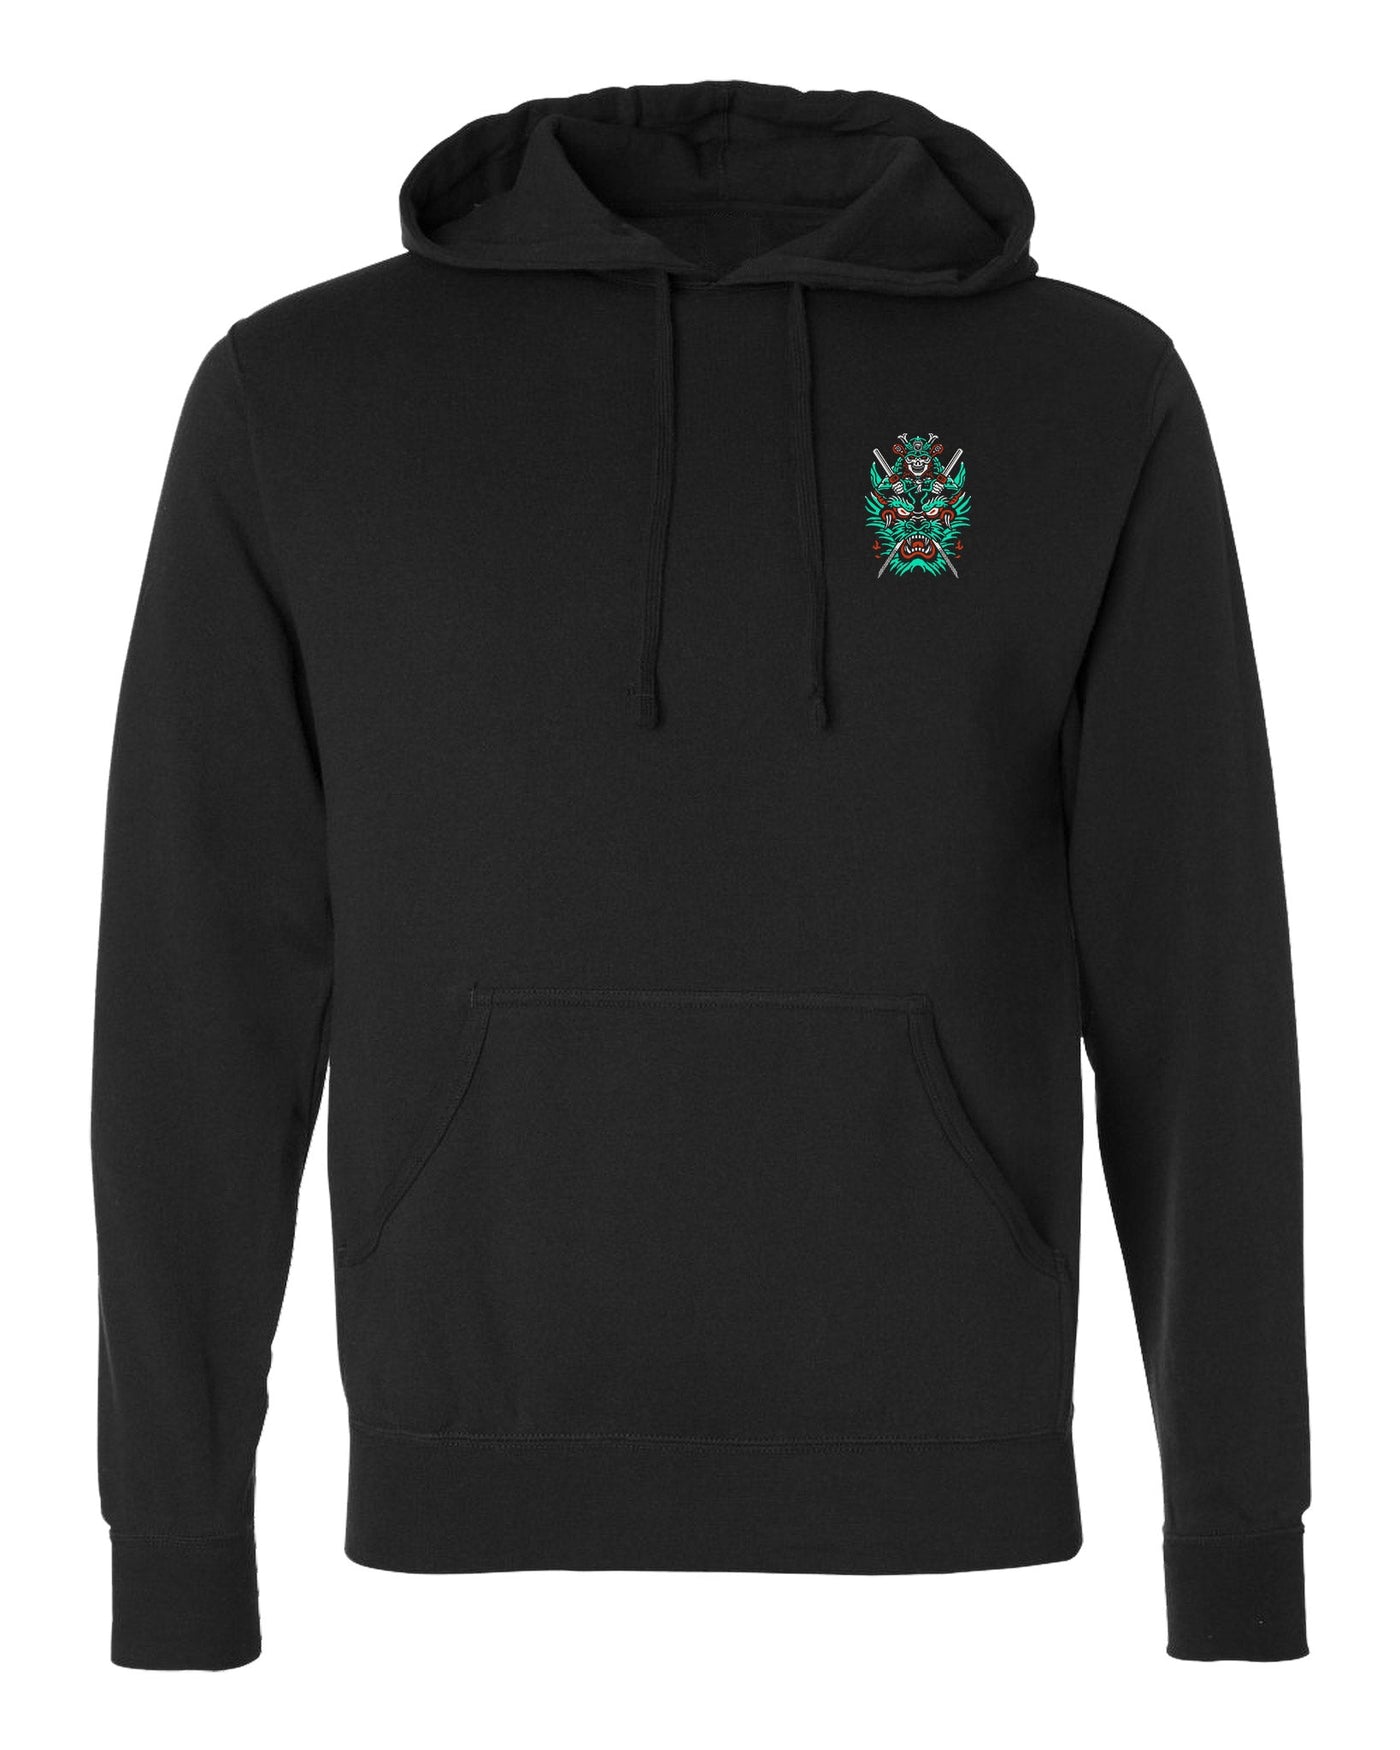 Slaying the Dragon - on Black Pullover Hoodie - Conquering Barbell